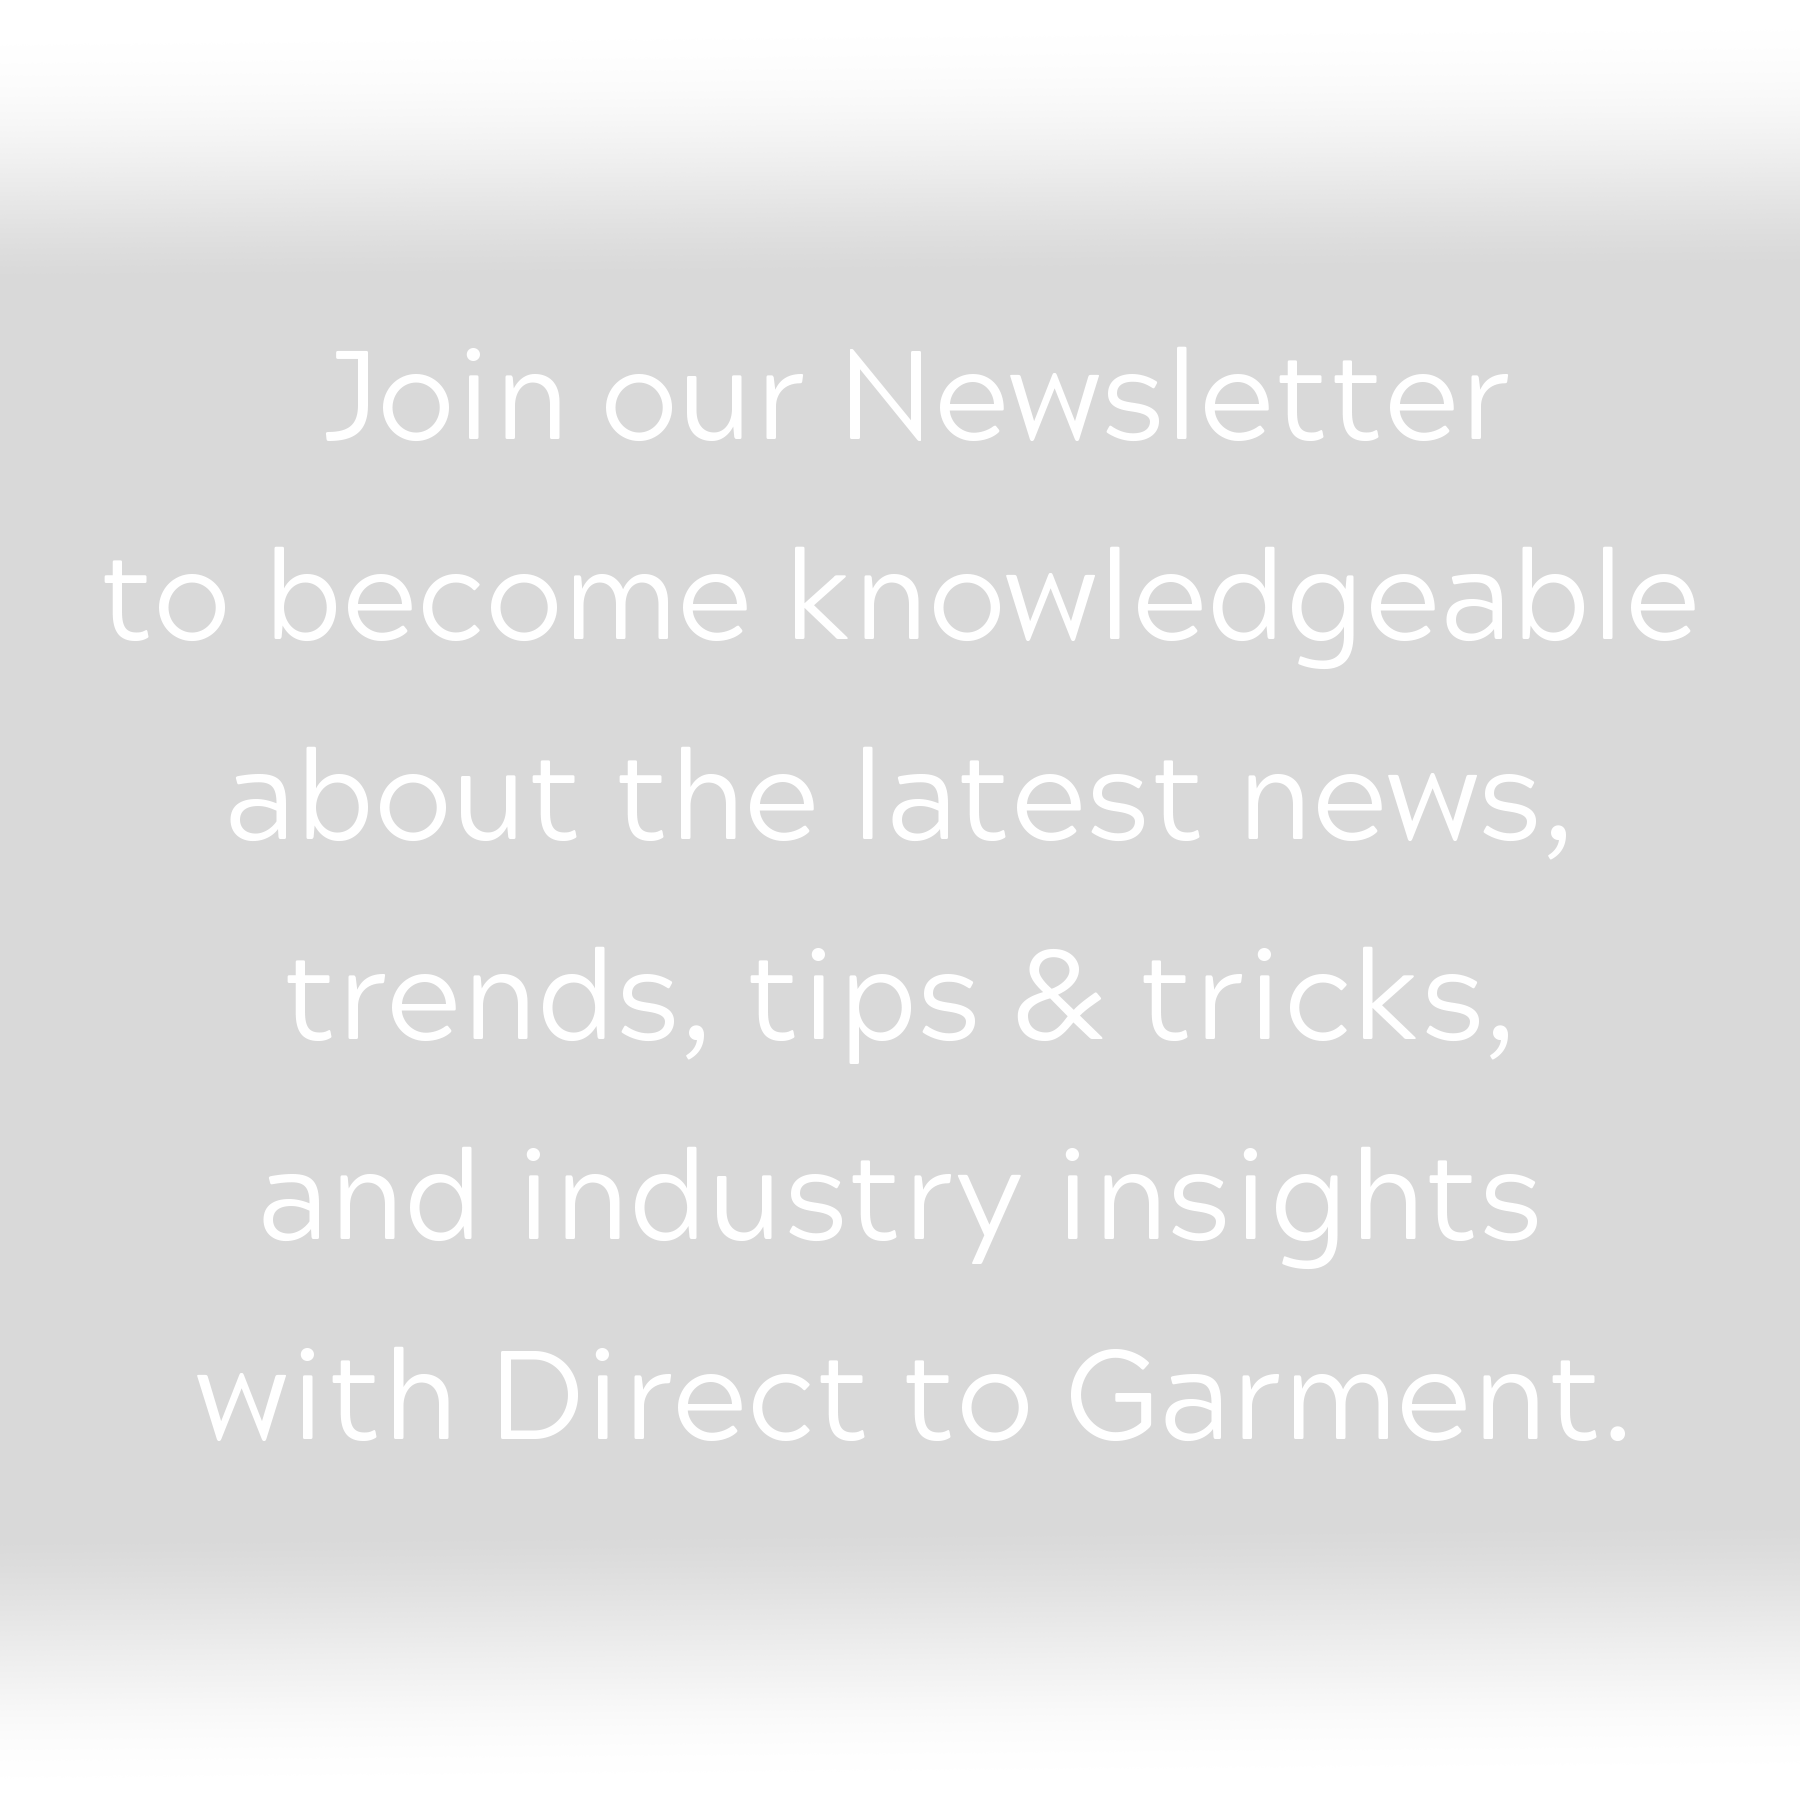 Join Our Newsletter image